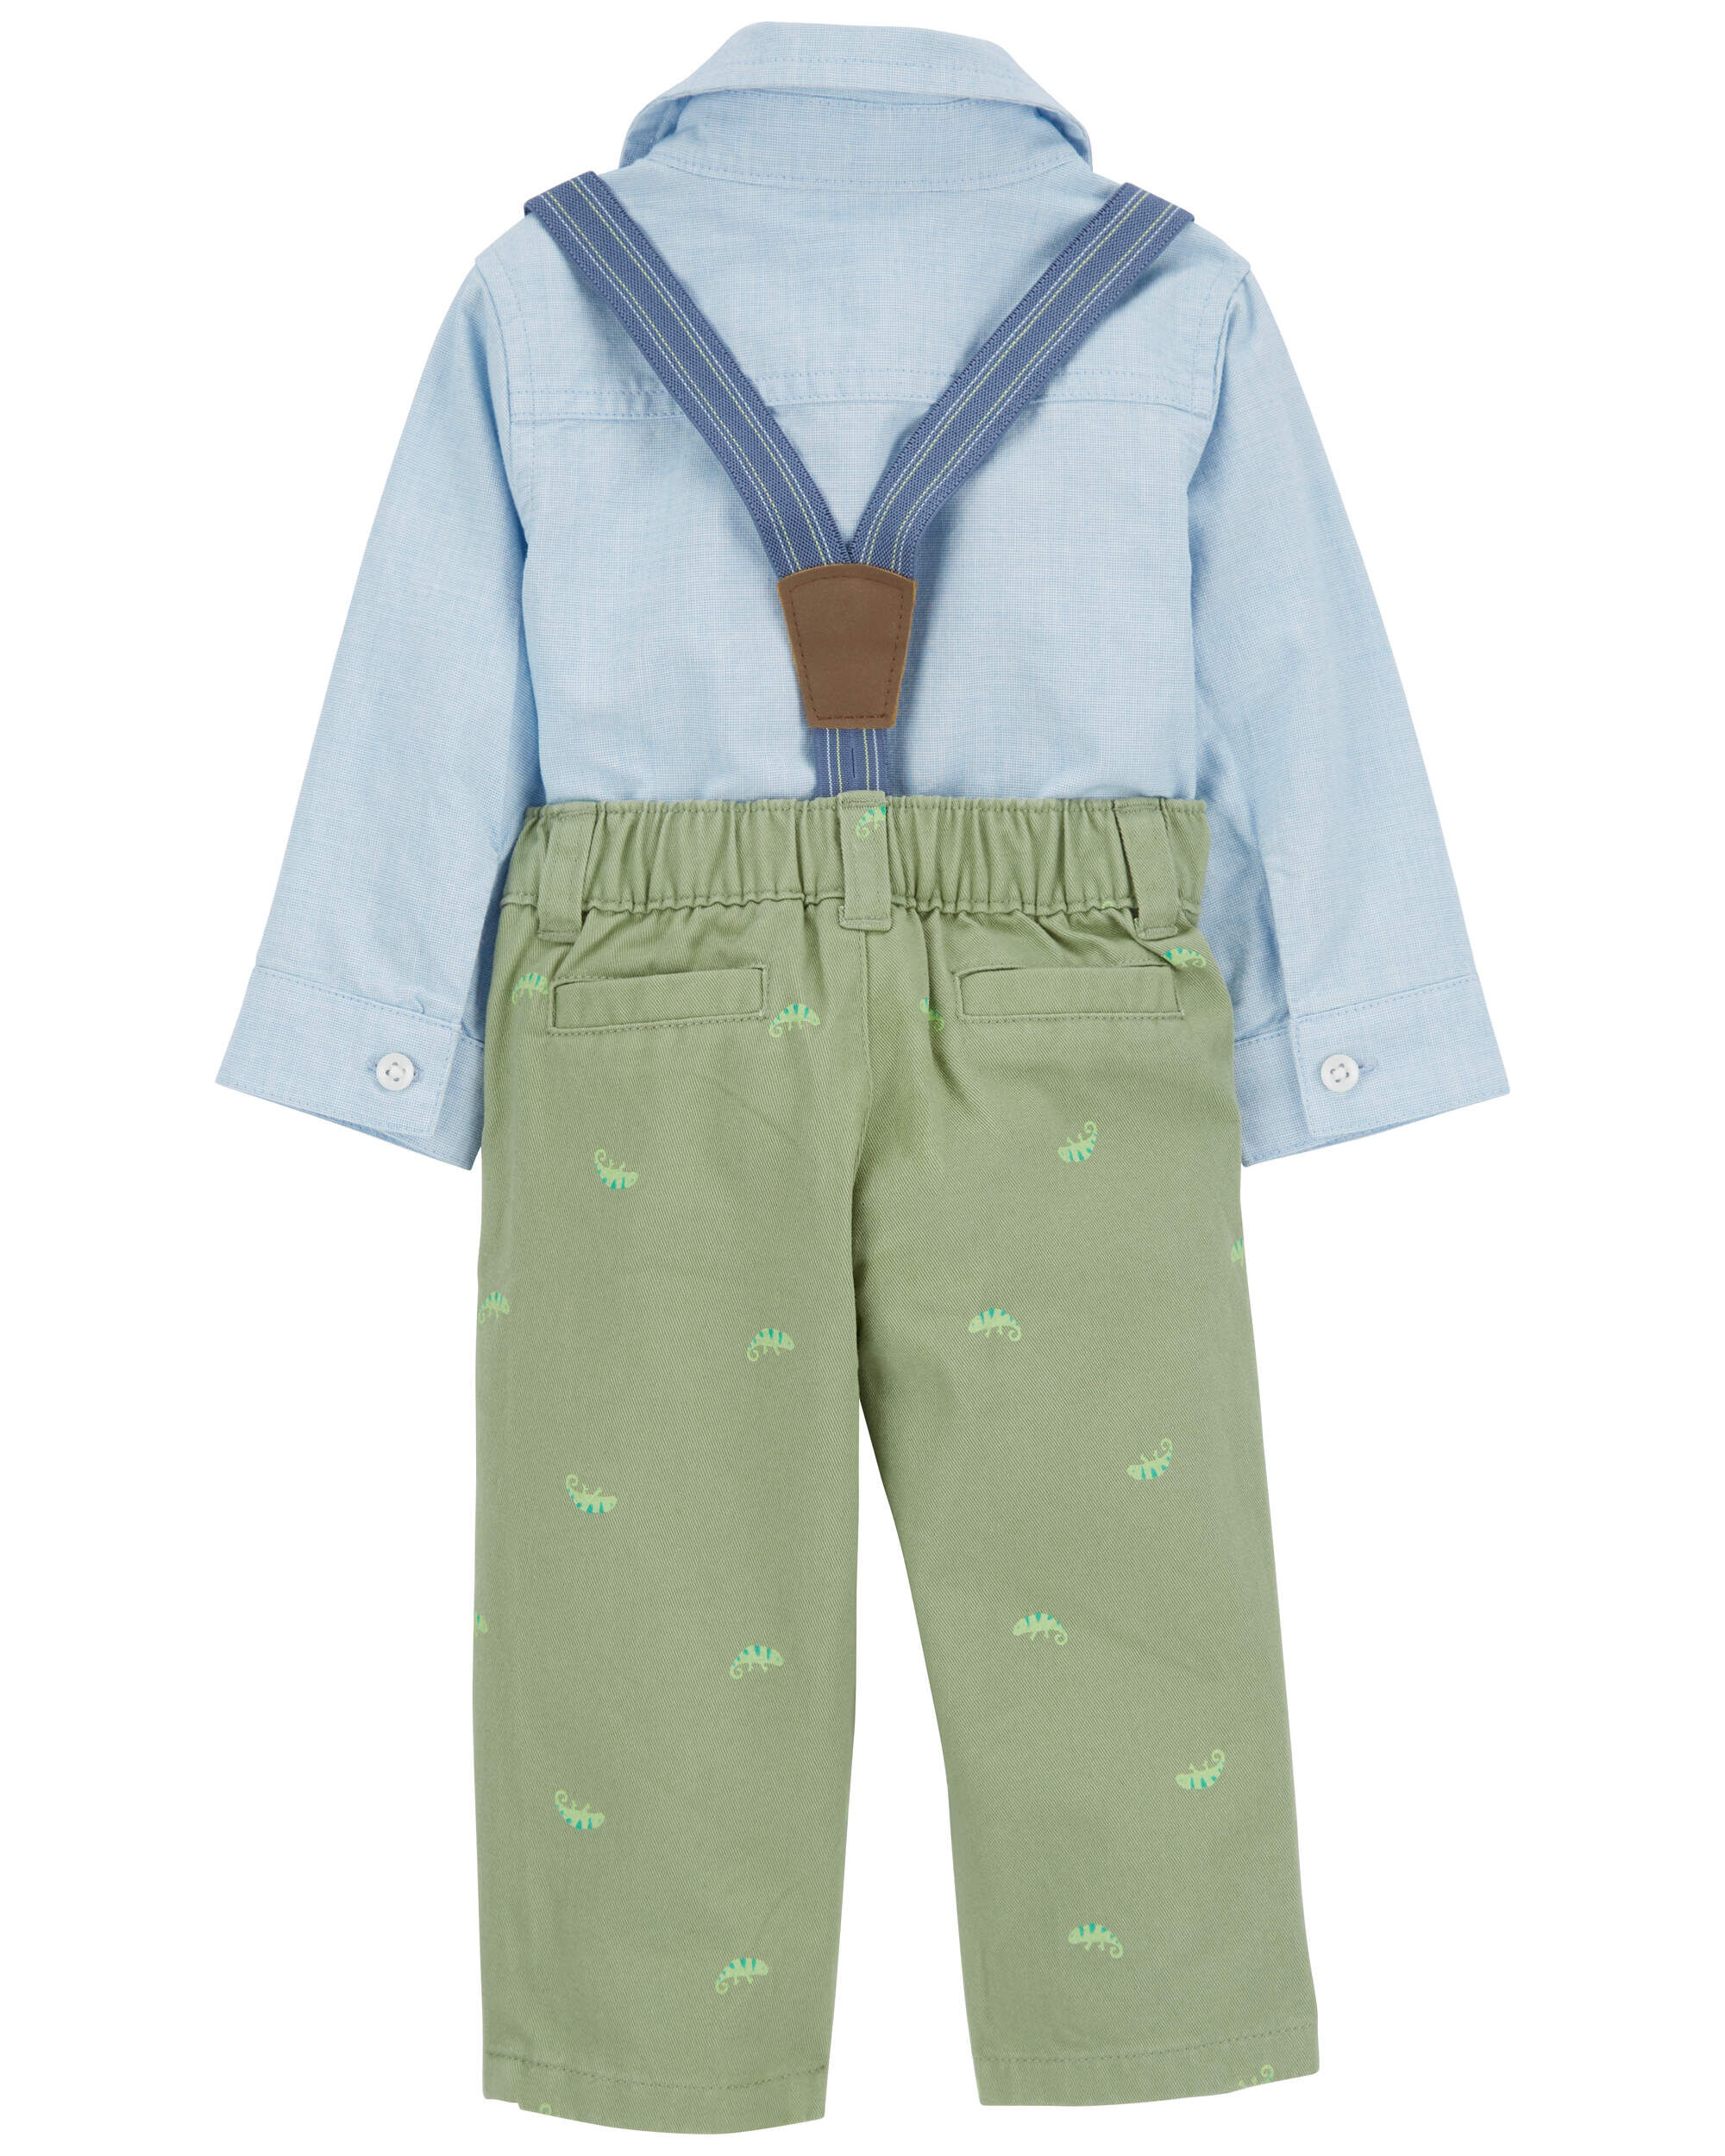 The Feast Baby Shirt And Pants Set Off-white Bobo Choses - Babyshop